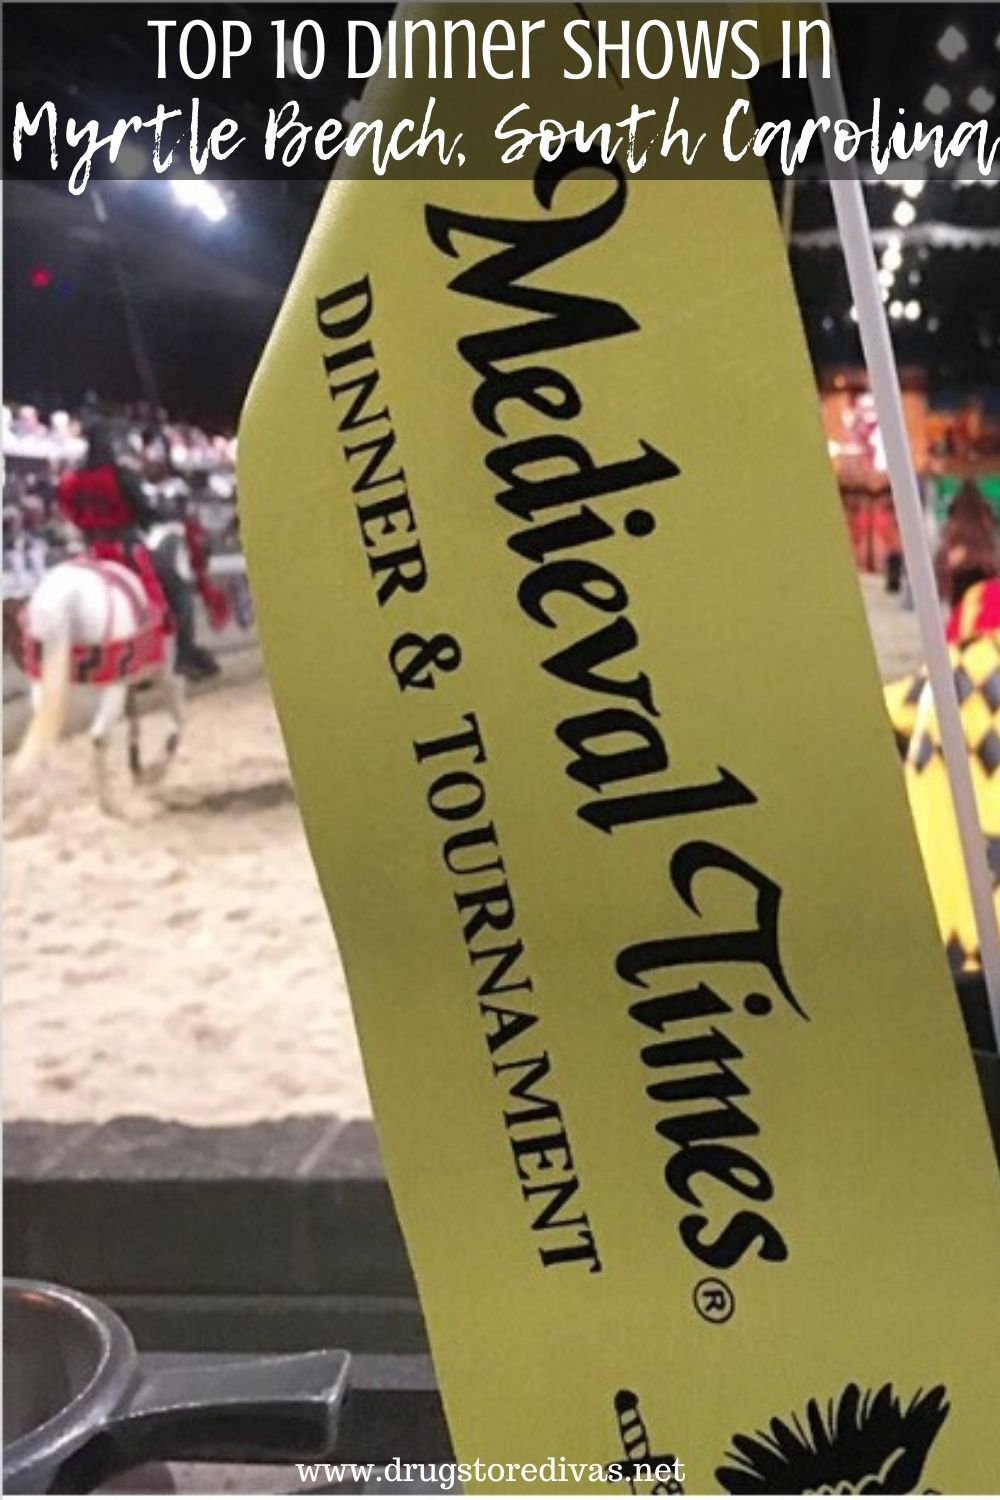 Flag at the Medieval Times arena with the words Top 10 Dinner Shows In Myrtle Beach, South Carolina.